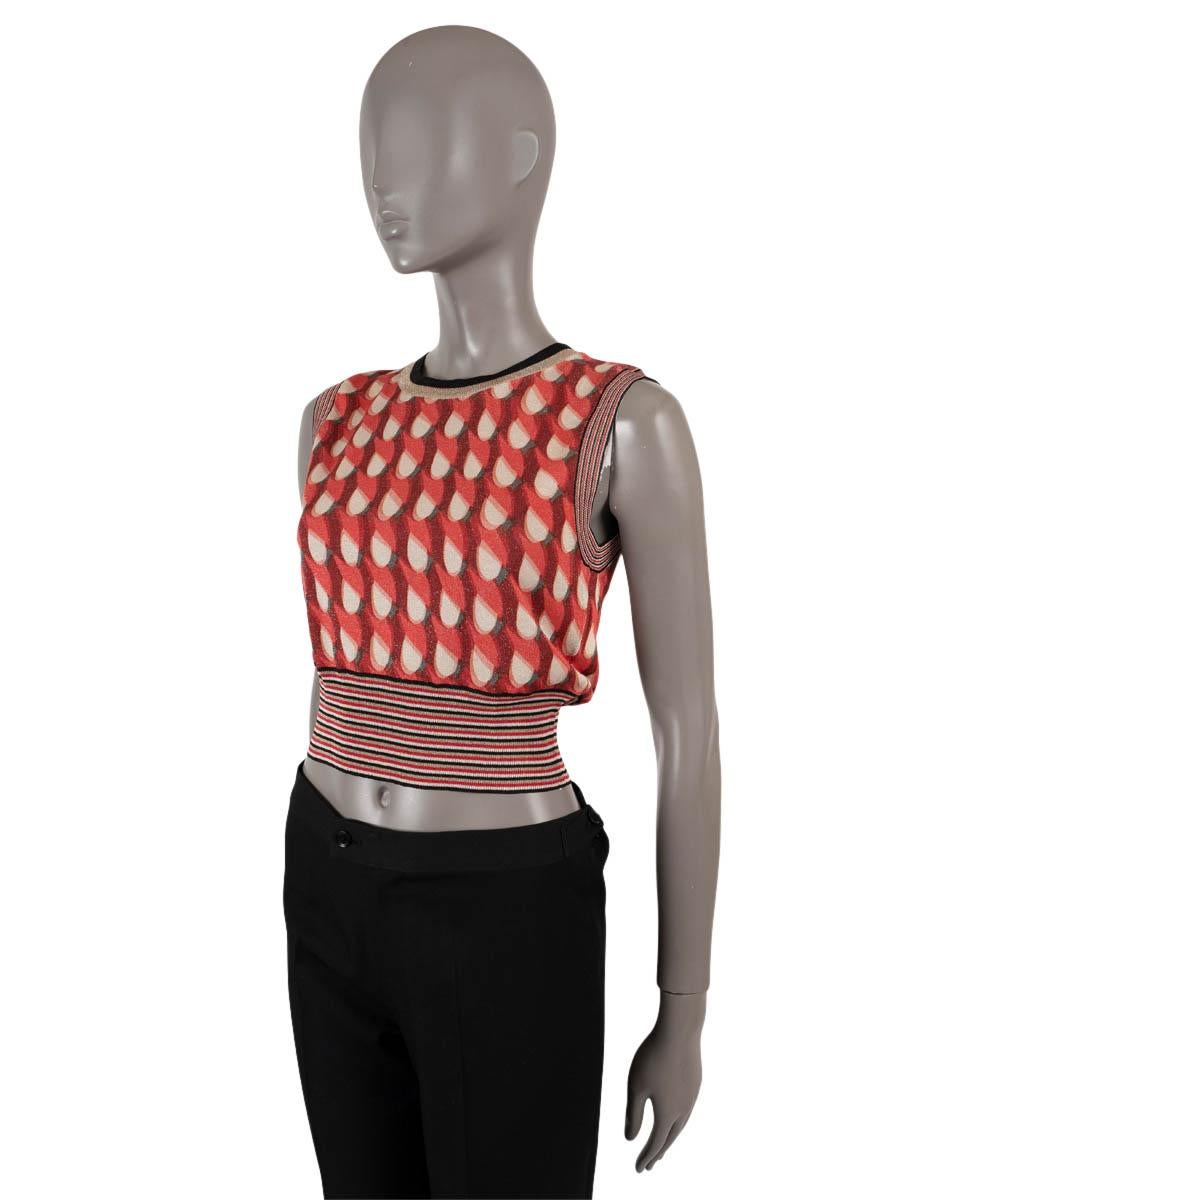 100% authentic Bottega Veneta Wallpaper Arc-print lurex sweater vest in red viscose (59%), silk (26%) and metal (15%). Features striped rib-knit armholes, neck and hem. Has been worn and is in excellent condition.

2018